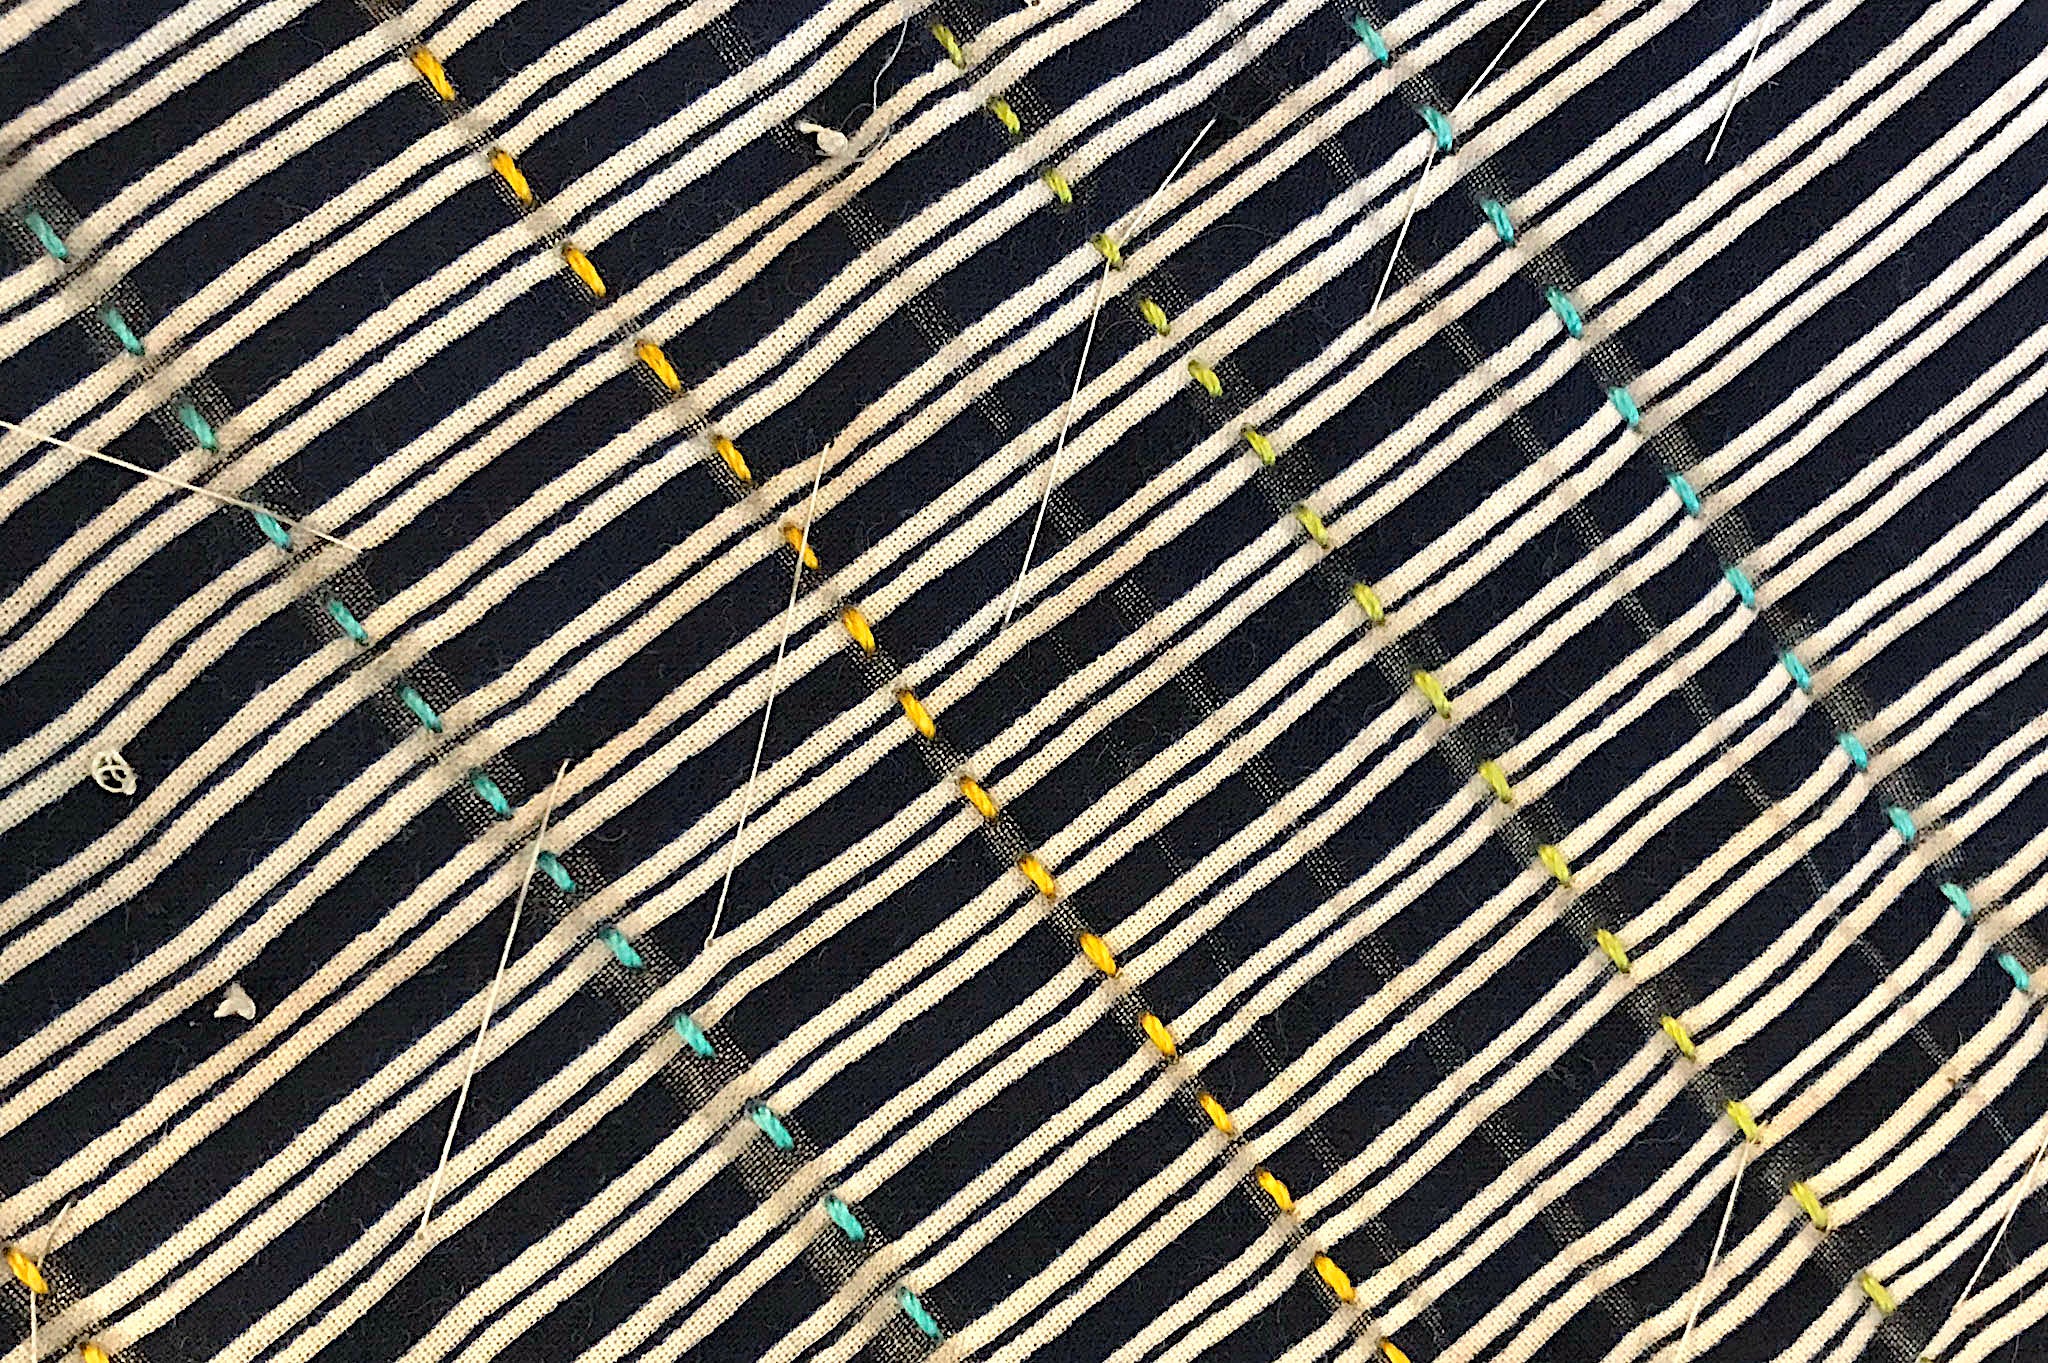 Detail of stitching in progress on Boro Quilt by Victoria Stone on a Sashiko 2 sewing machine